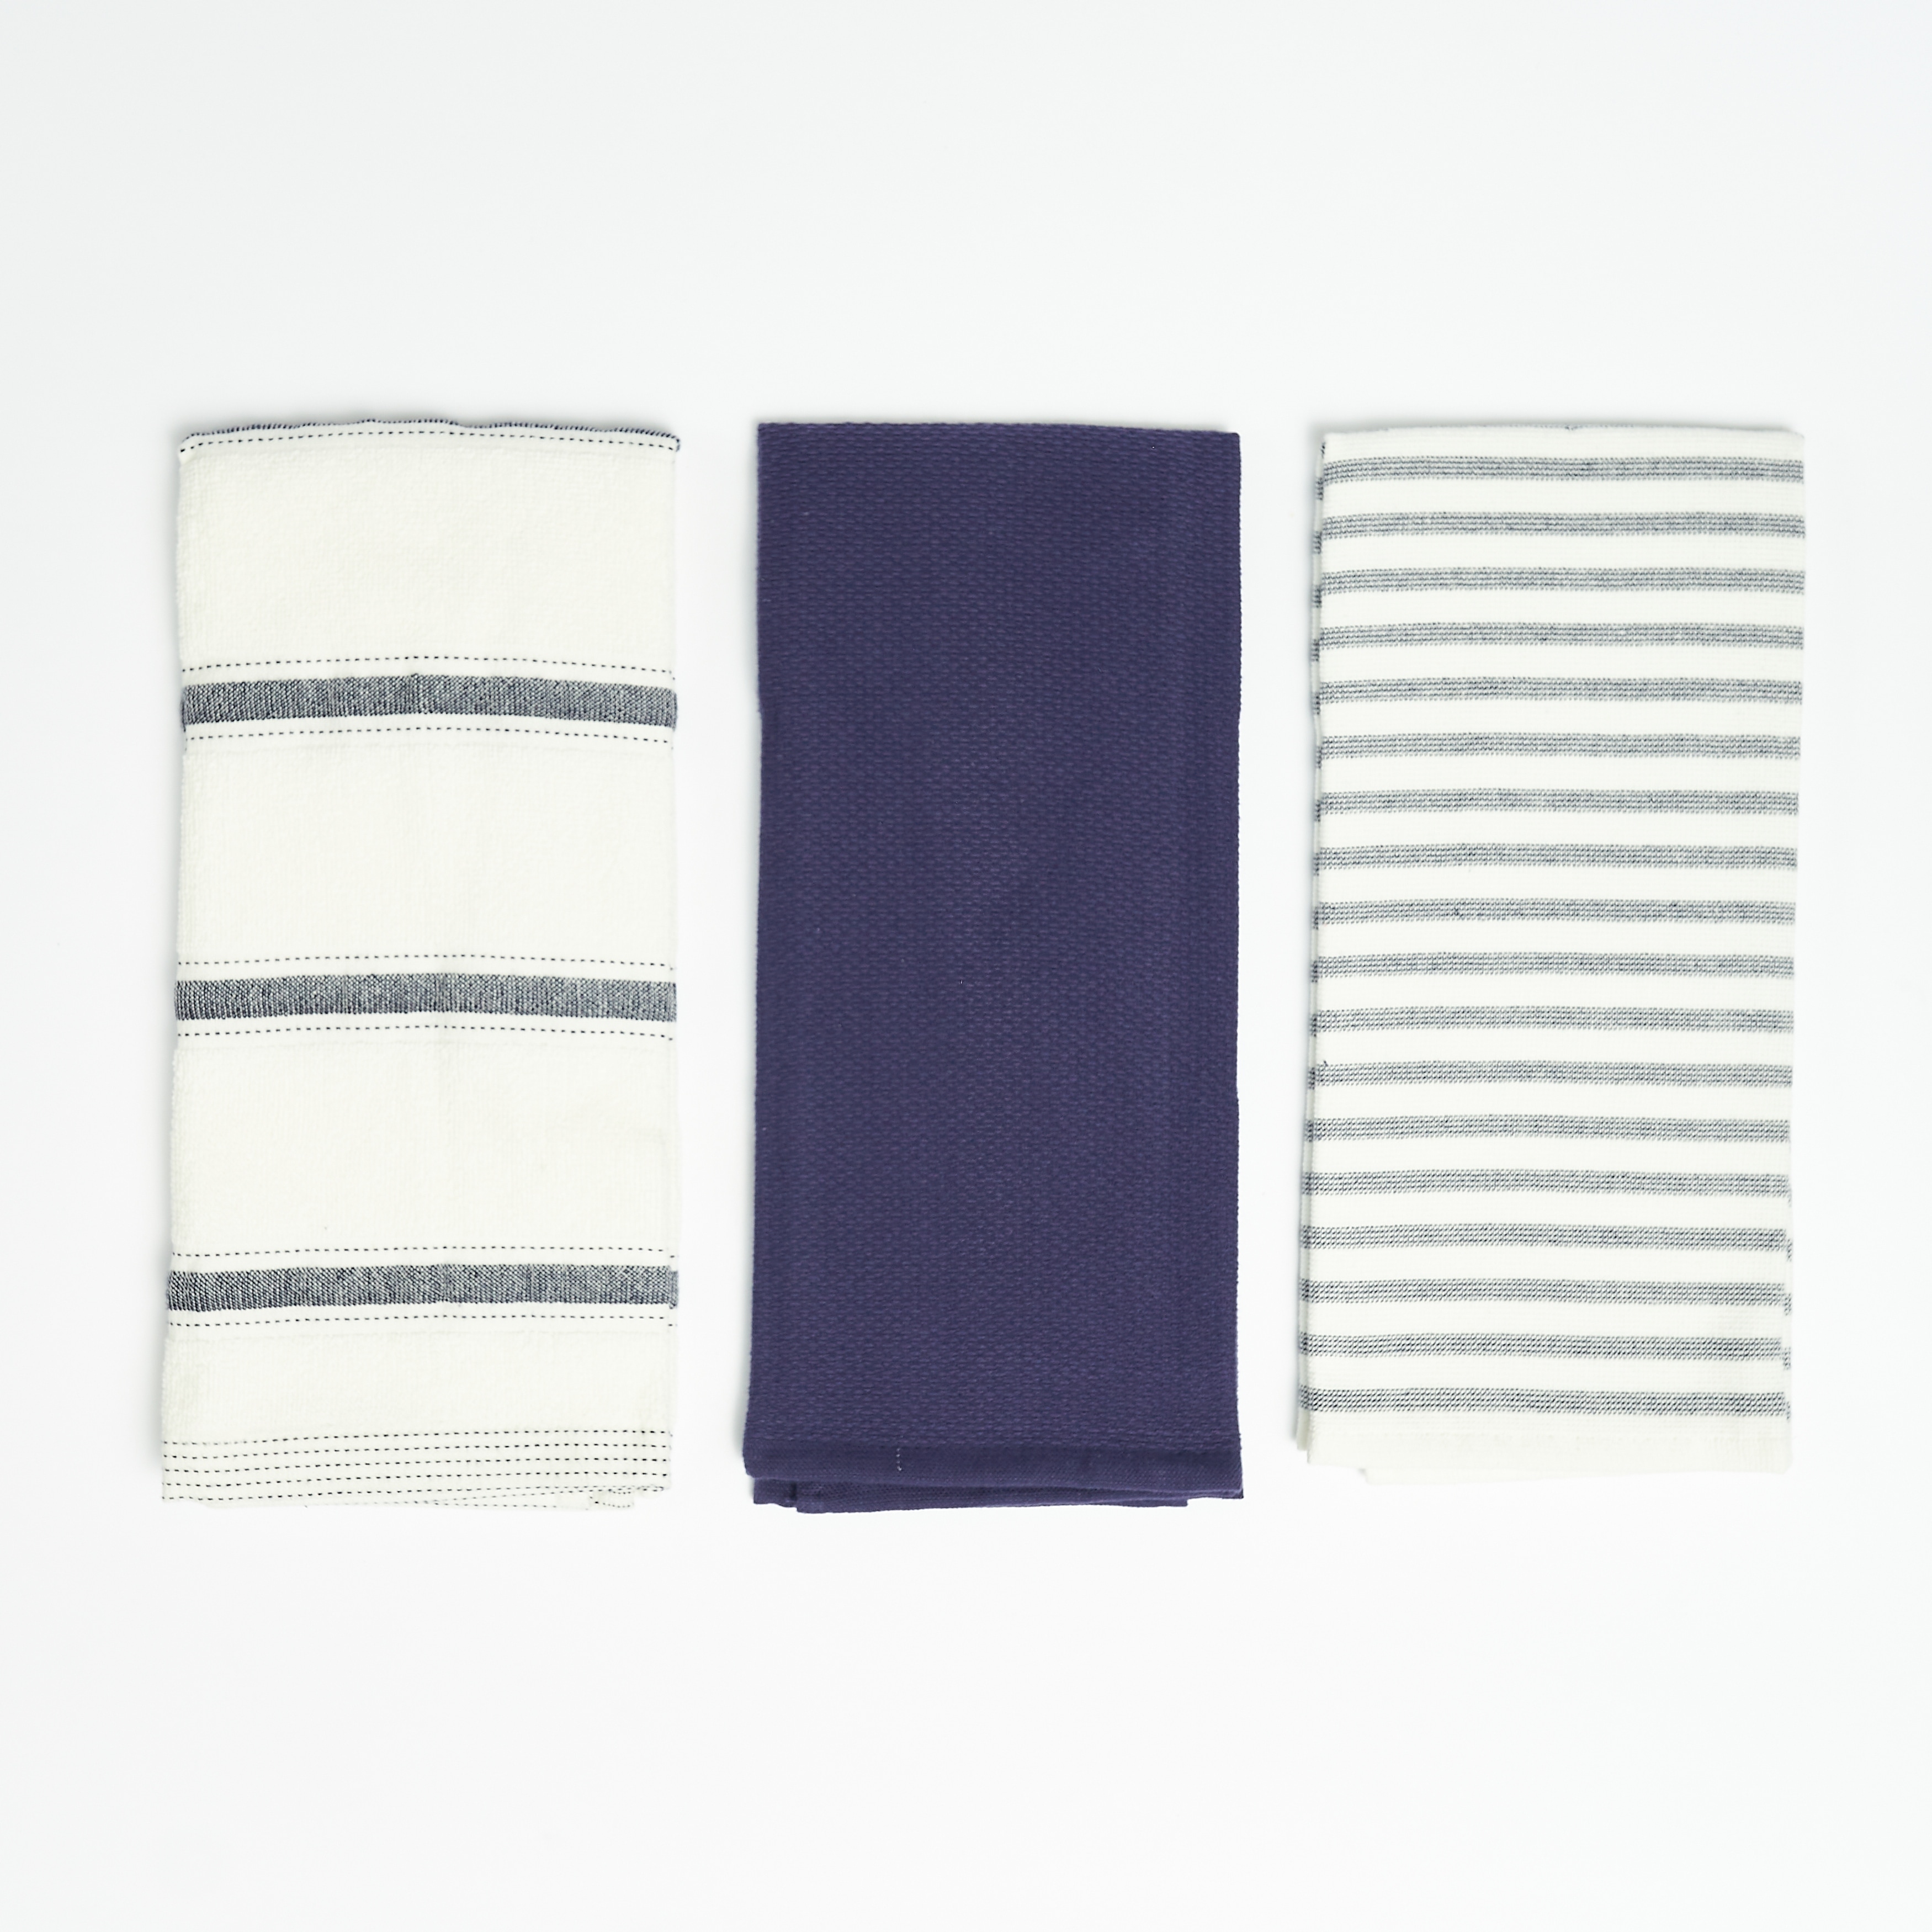 SET OF 2 New NAUTICA HOME Cotton Hand Towels QUICK DRY Textured Beachwood Green